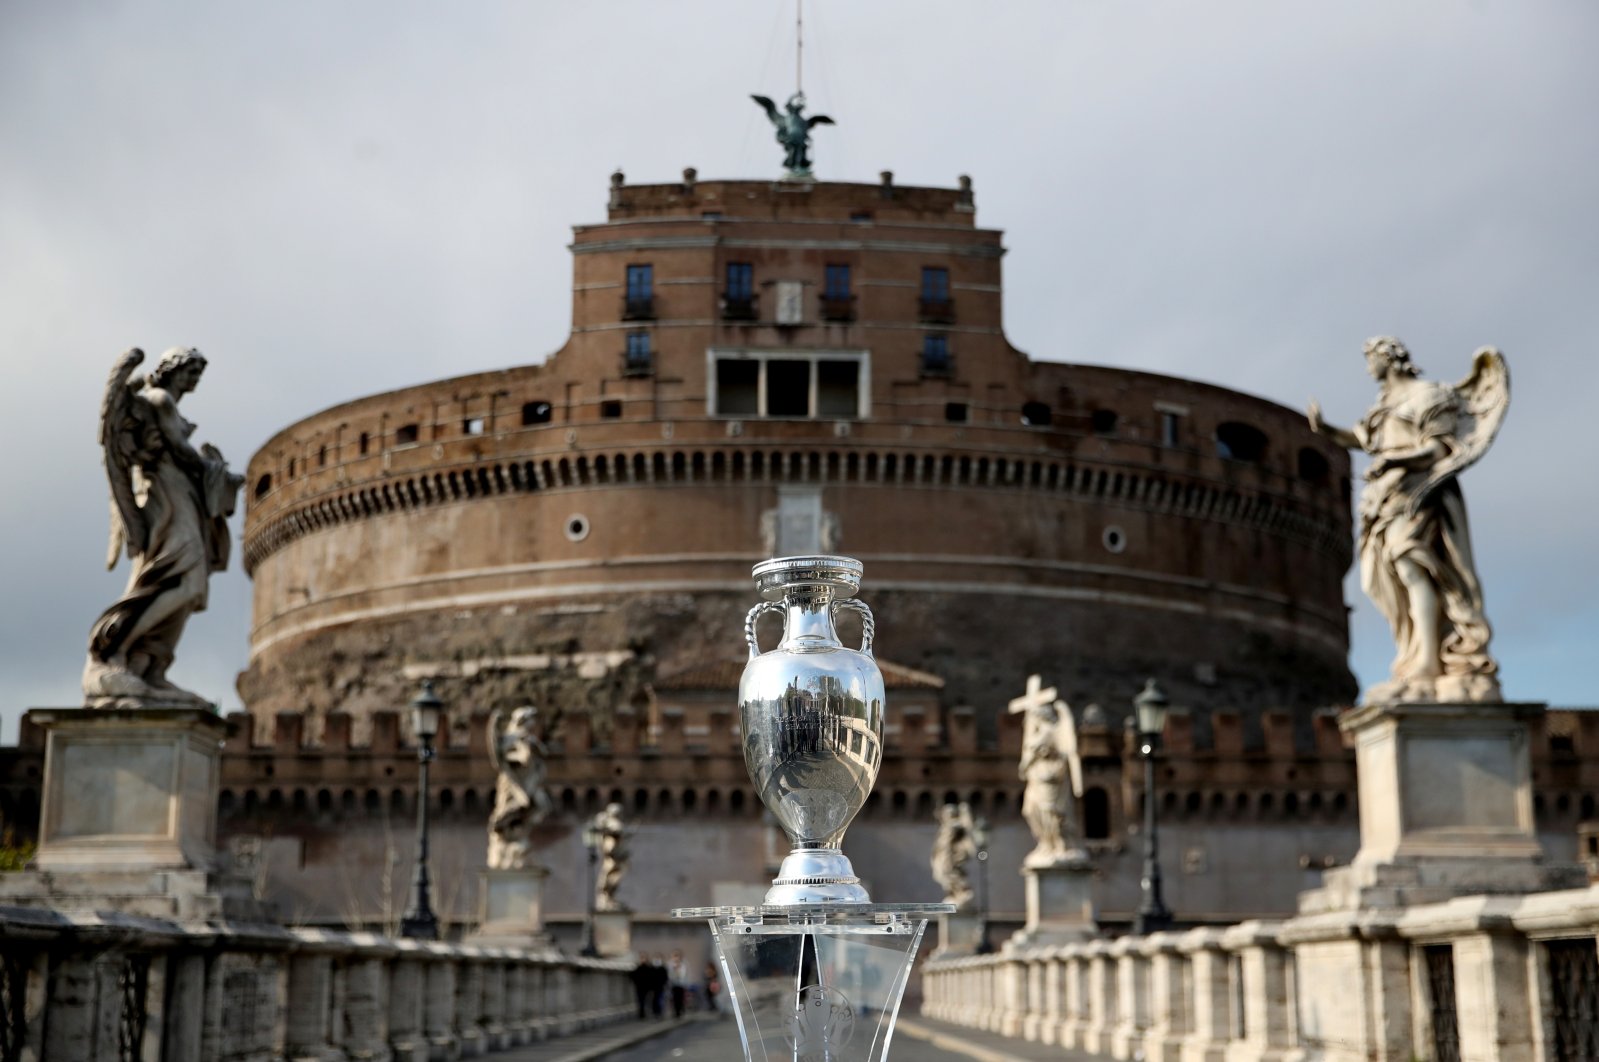 The UEFA European Championship trophy is displayed in Rome, Castel'Angelo Bridge, Rome, Italy, April 20, 2021. (Reuters Photo)